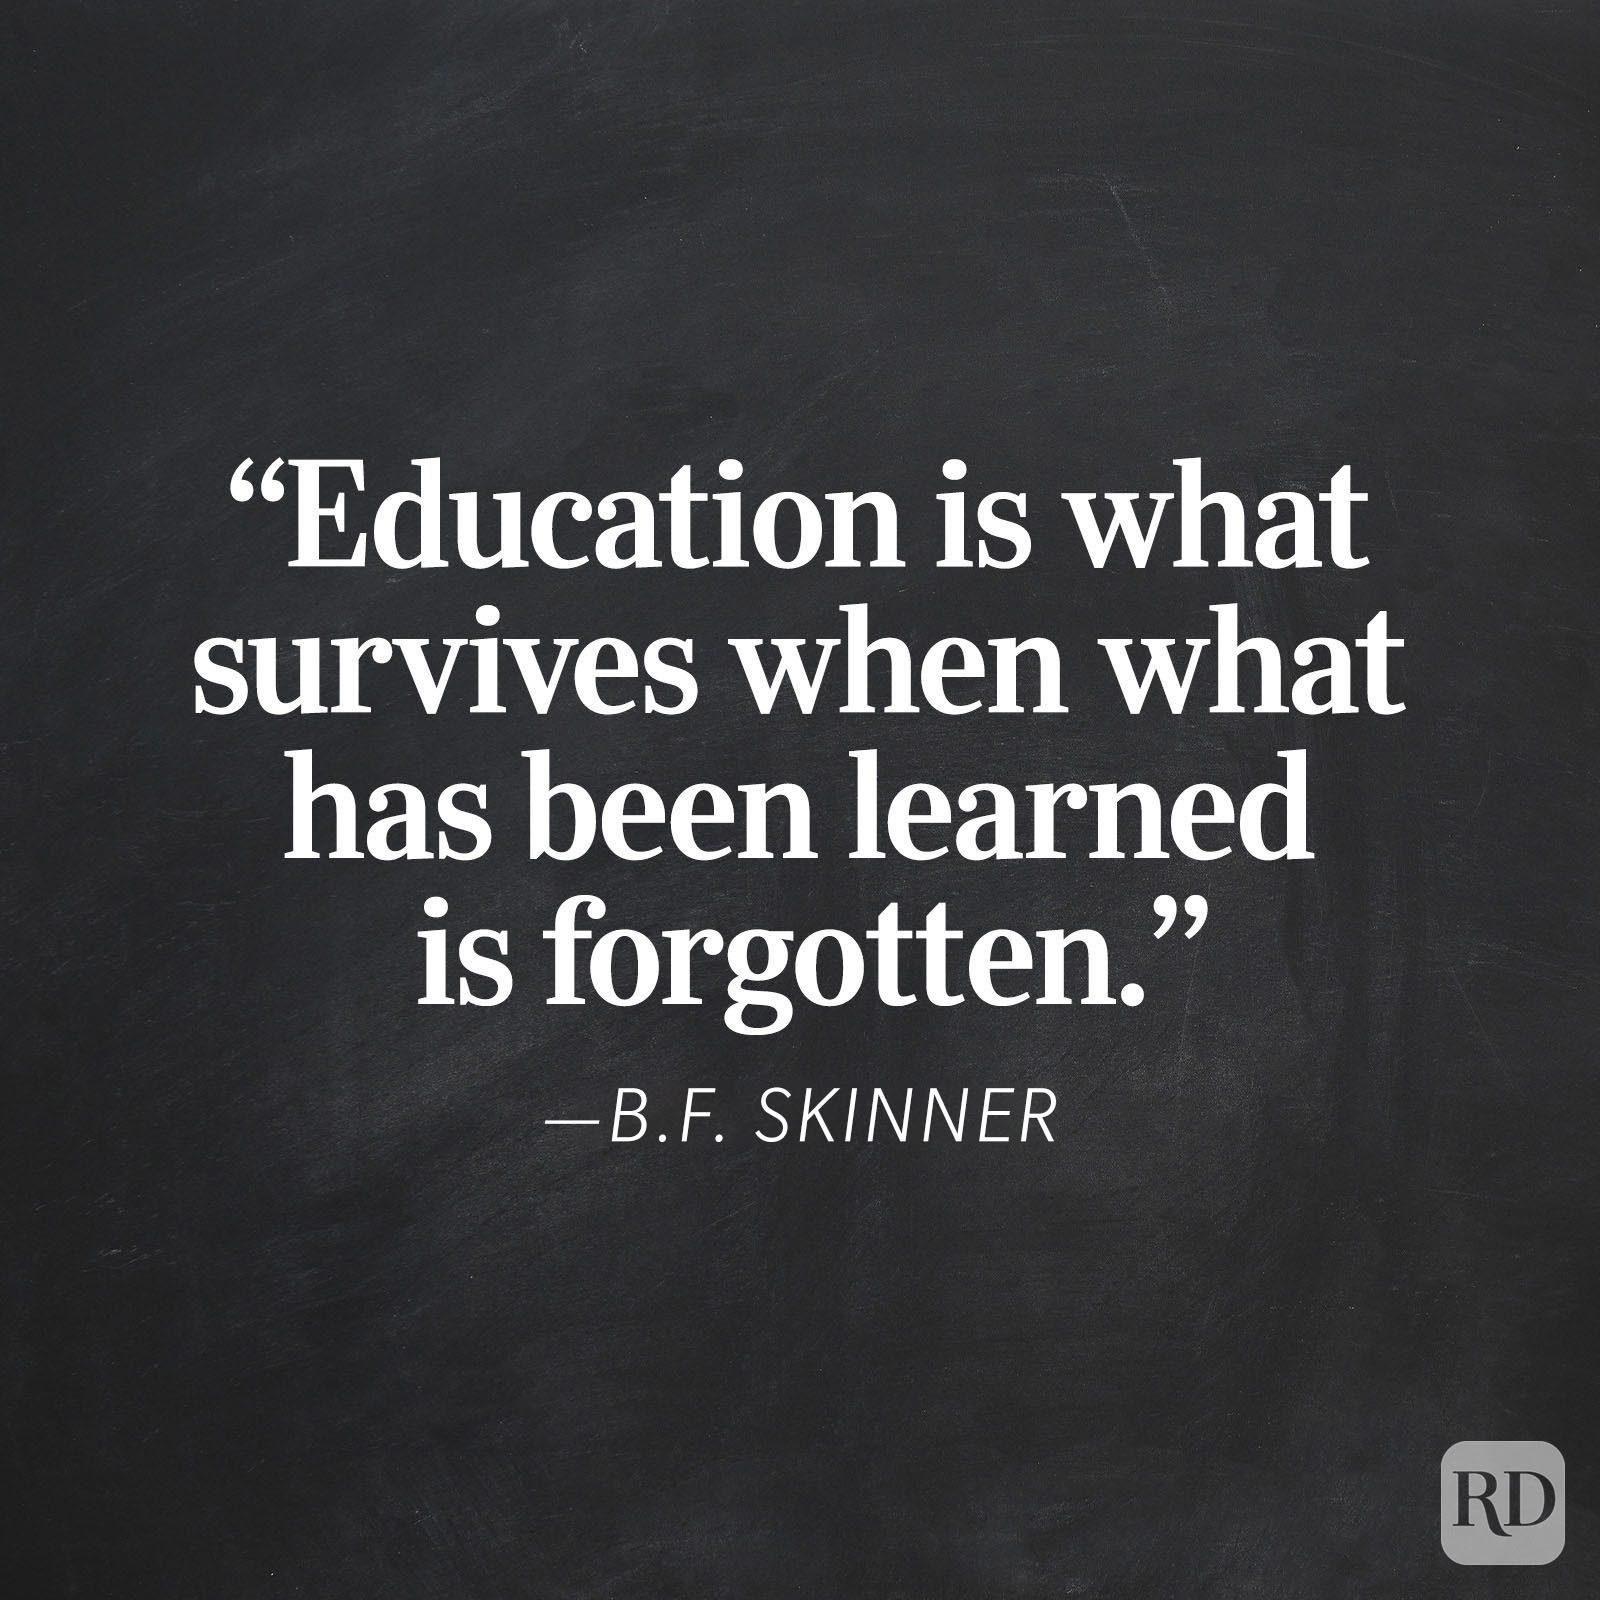 famous quotations on education